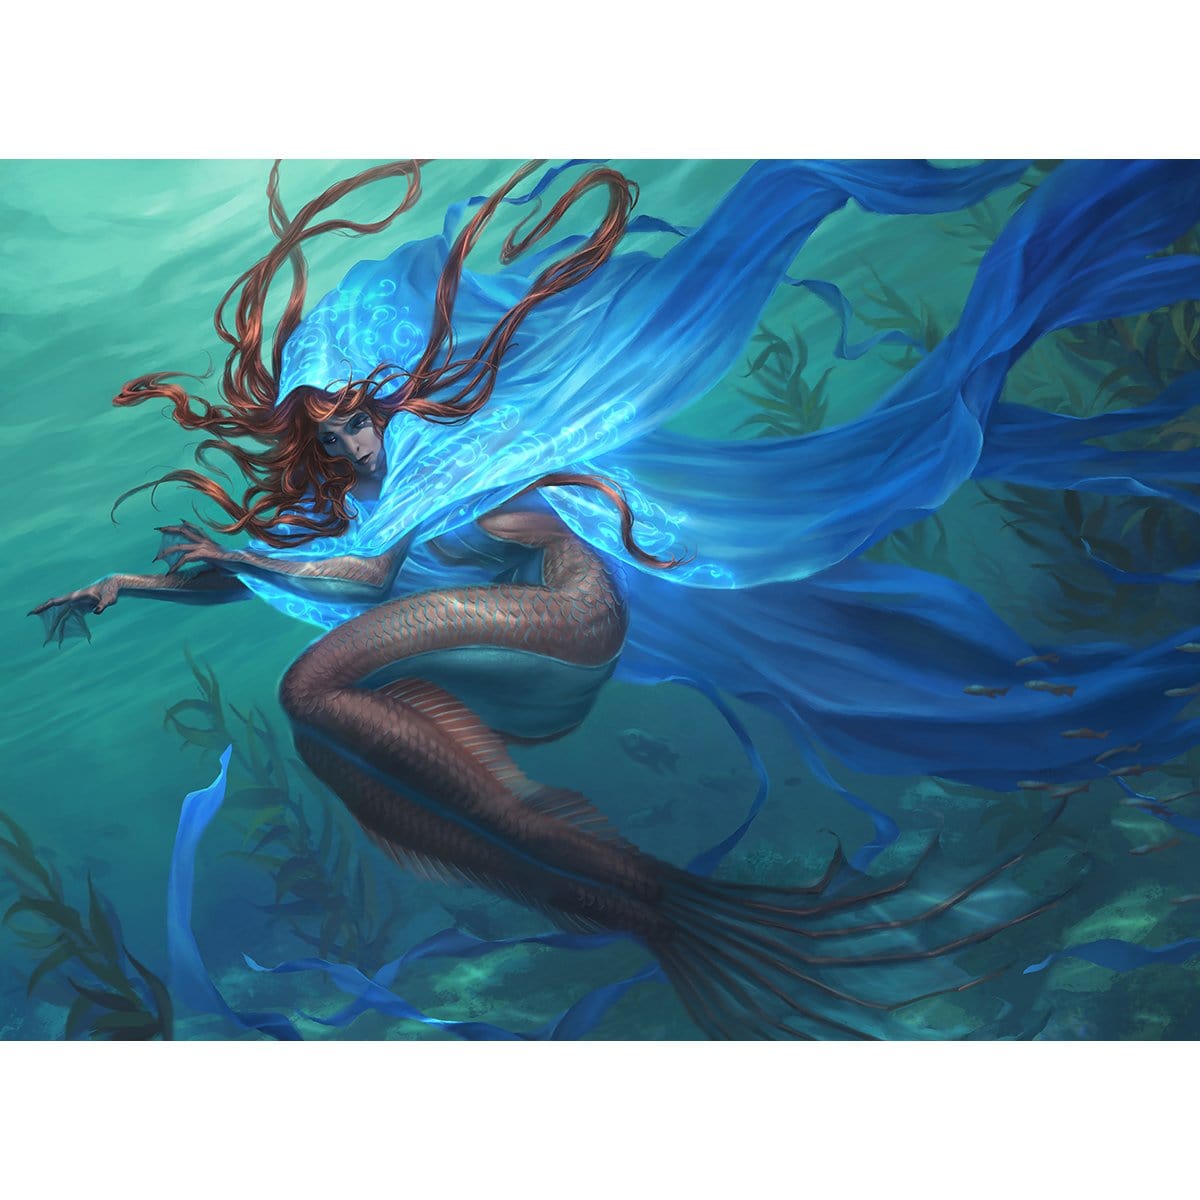 Mantle of Tides Print - Print - Original Magic Art - Accessories for Magic the Gathering and other card games